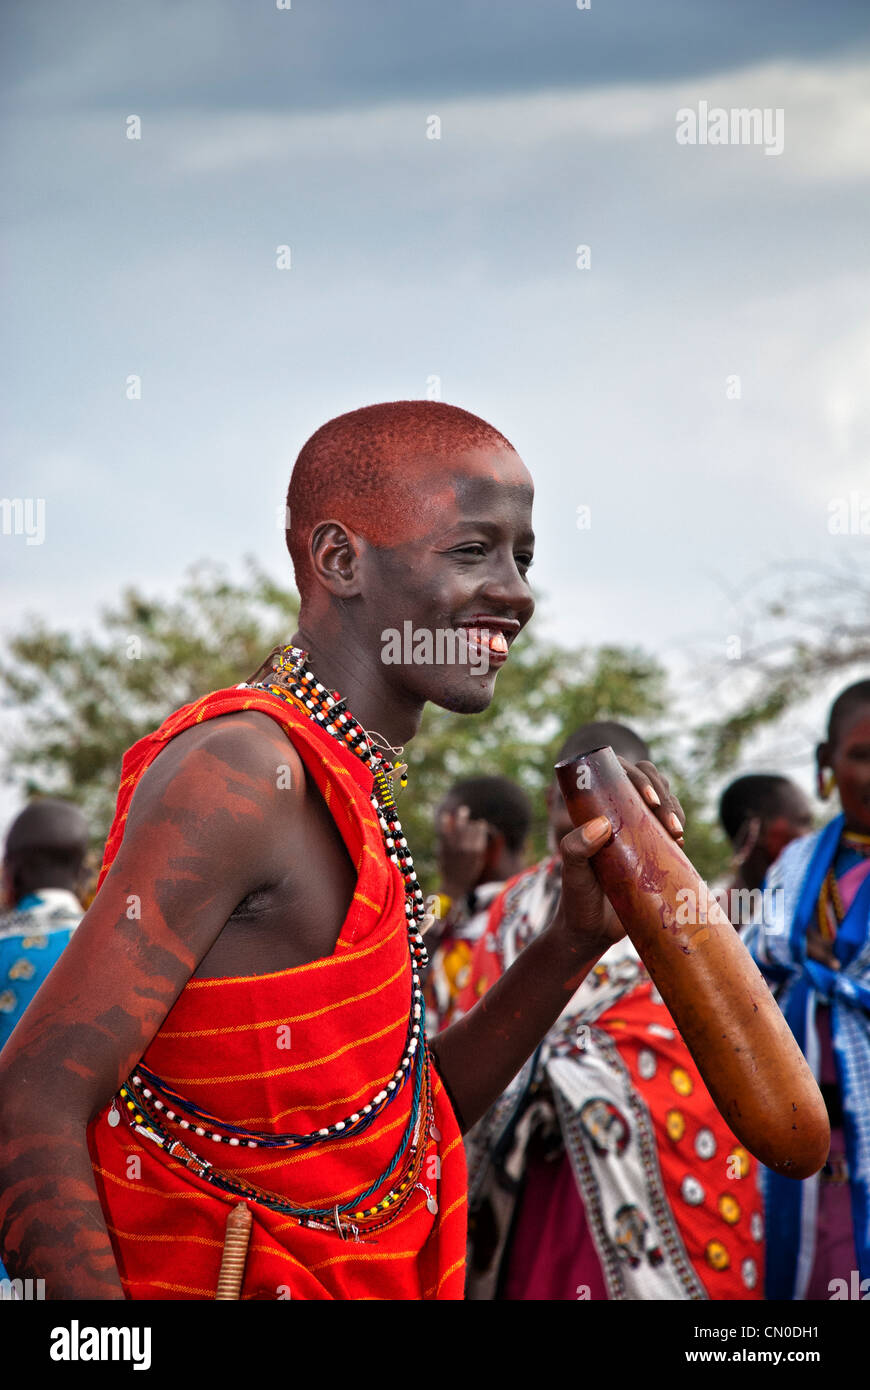 Masai man, wearing colorful traditional clothes, drinking cow's blood from a gourd, a village in the Masai Mara, Kenya, Africa Stock Photo